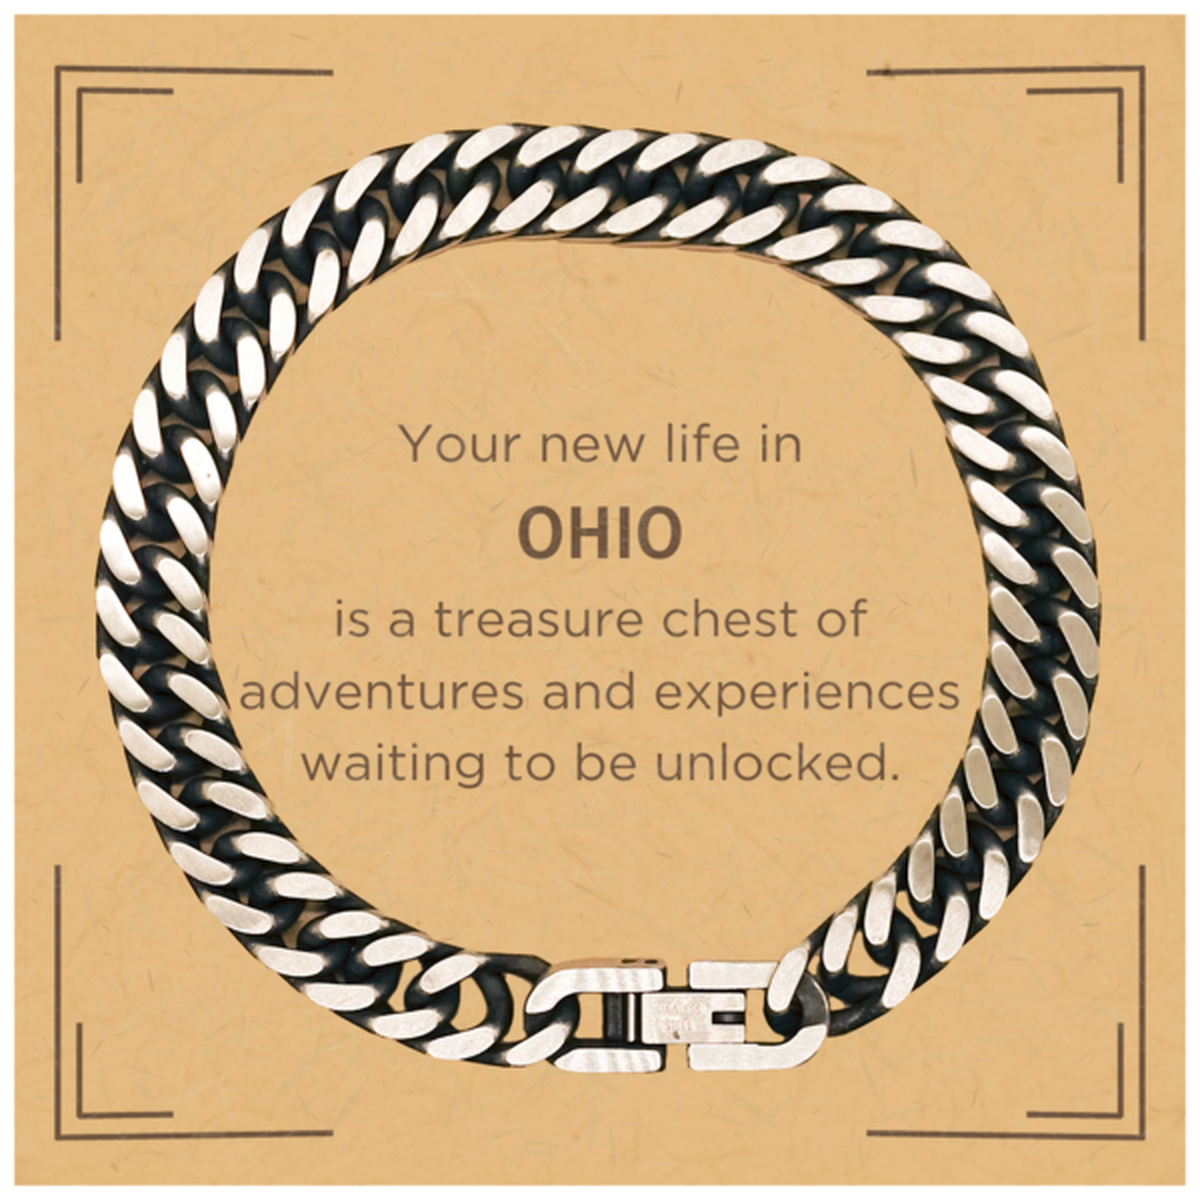 Moving to Ohio Gifts, Your new life in Ohio, Long Distance Ohio Christmas Cuban Link Chain Bracelet For Men, Women, Friends, Coworkers